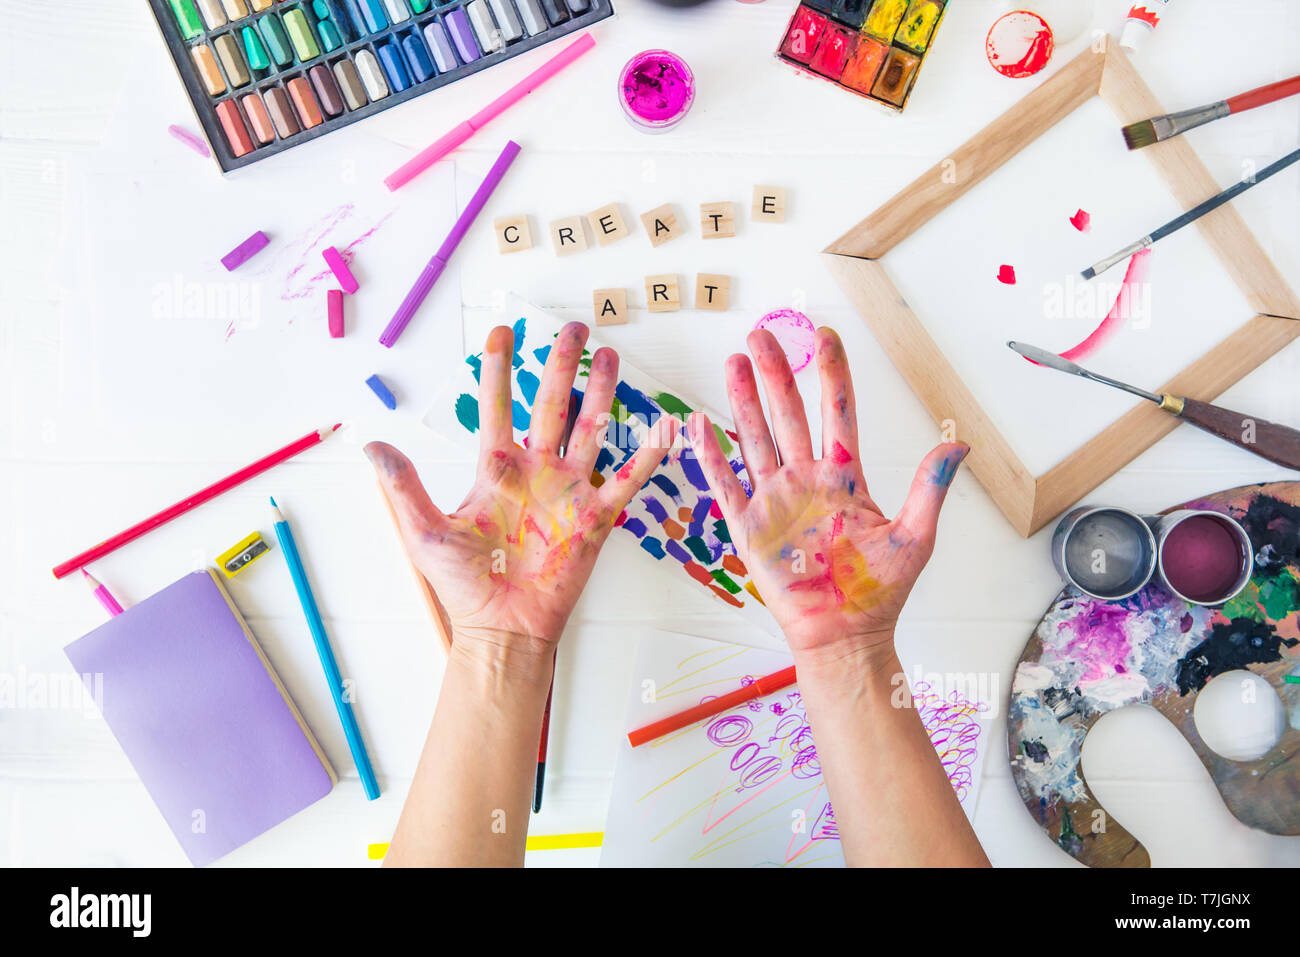 https://c8.alamy.com/comp/T7JGNX/top-view-opened-painted-female-hands-over-create-art-words-lettering-with-many-colorful-paintiing-materials-on-white-background-art-workshop-drawing-T7JGNX.jpg